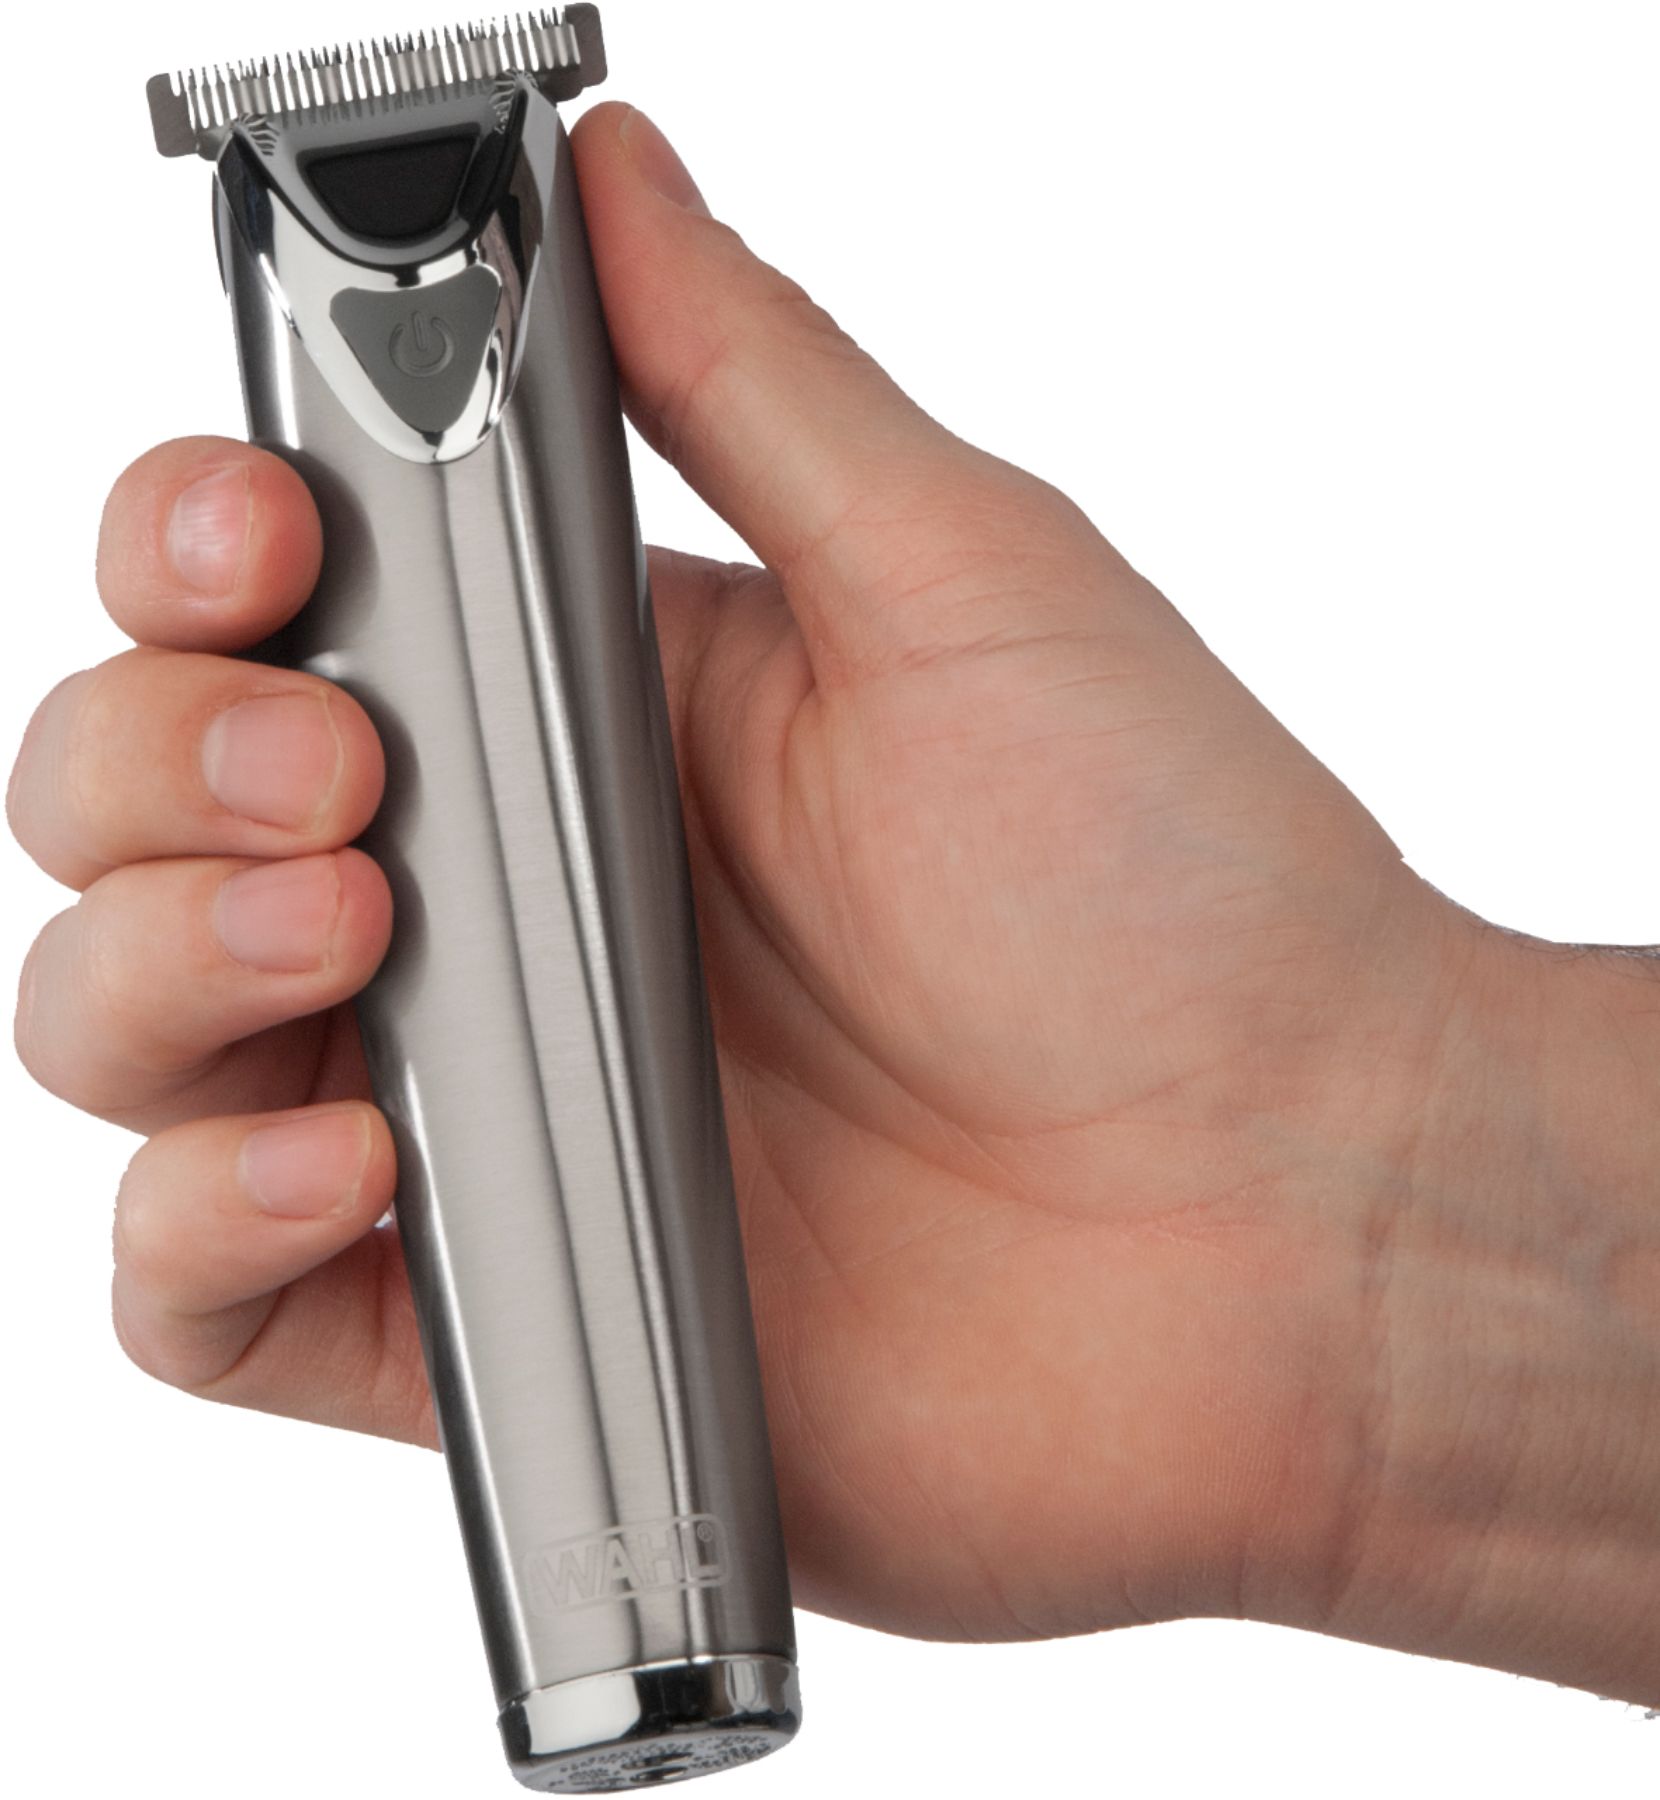 Best Buy: Wahl Lithium Ion All-In-One Trimmer Stainless-Steel 9818 Wahl Trimmer Stainless Steel Lithium Ion